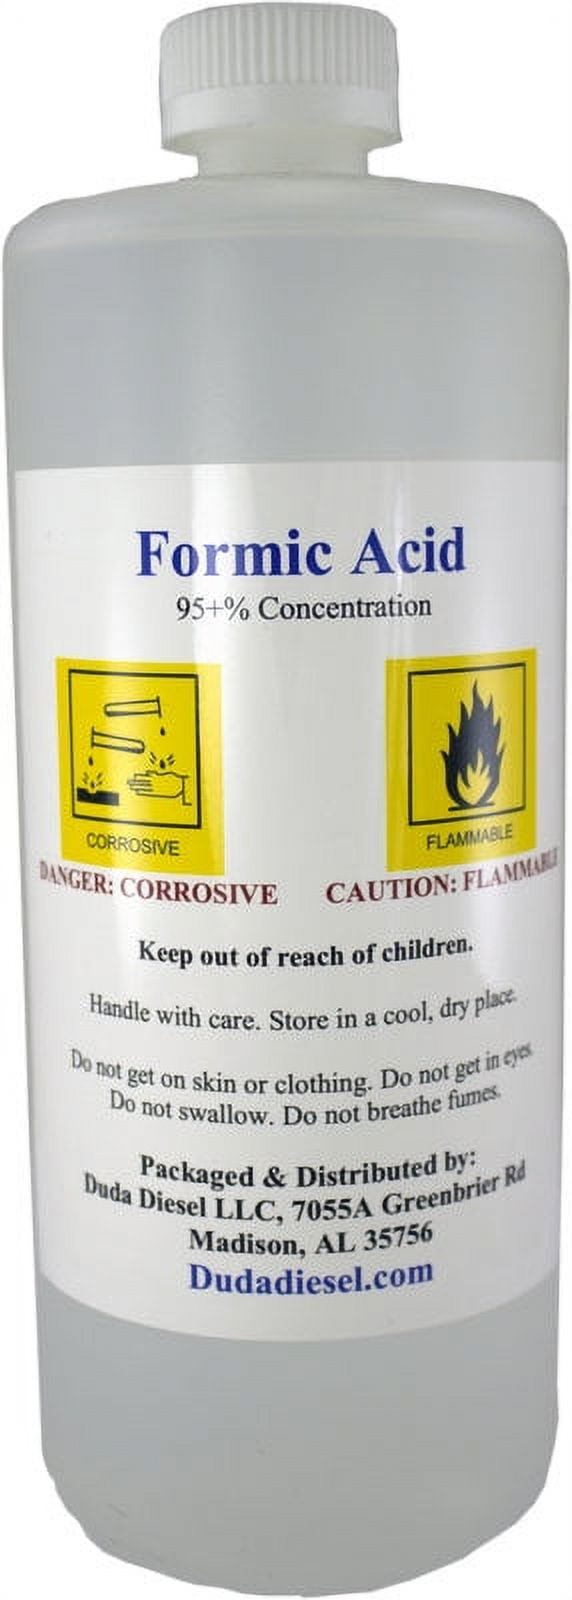 Stearic acid, 97%, Thermo Scientific Chemicals